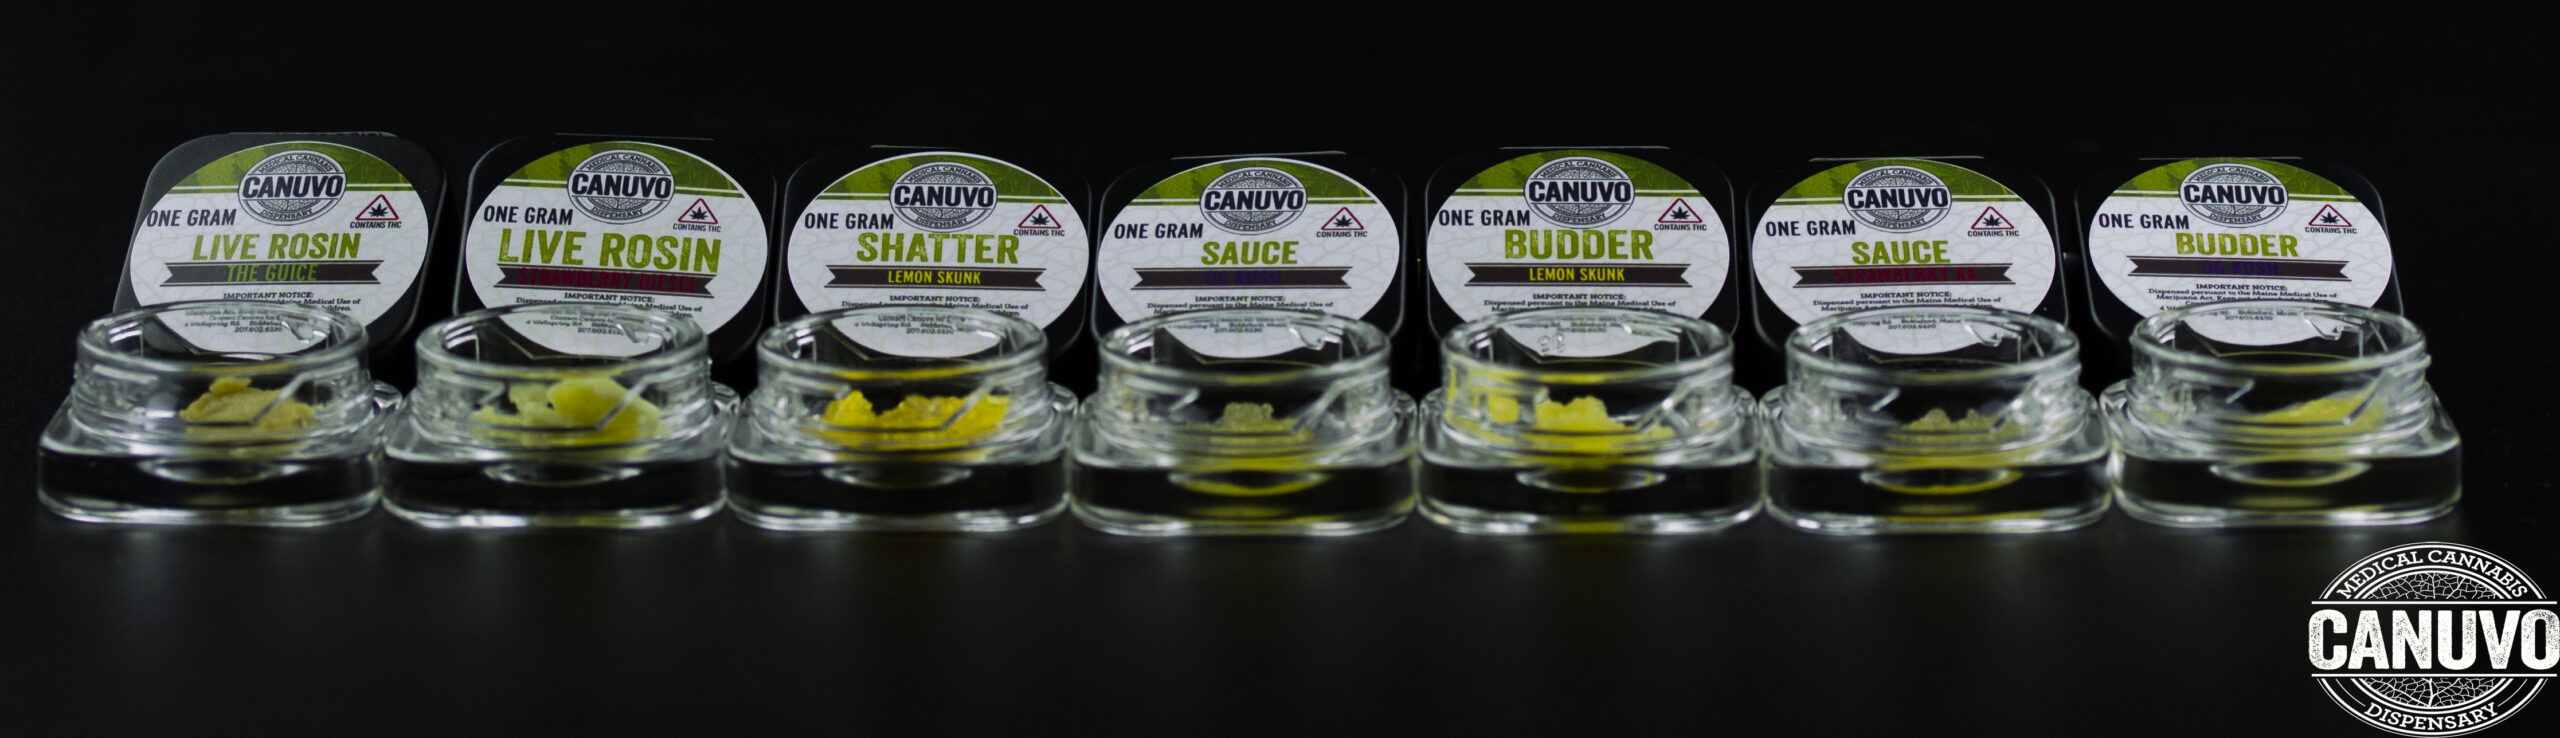 Canuvo Concentrates